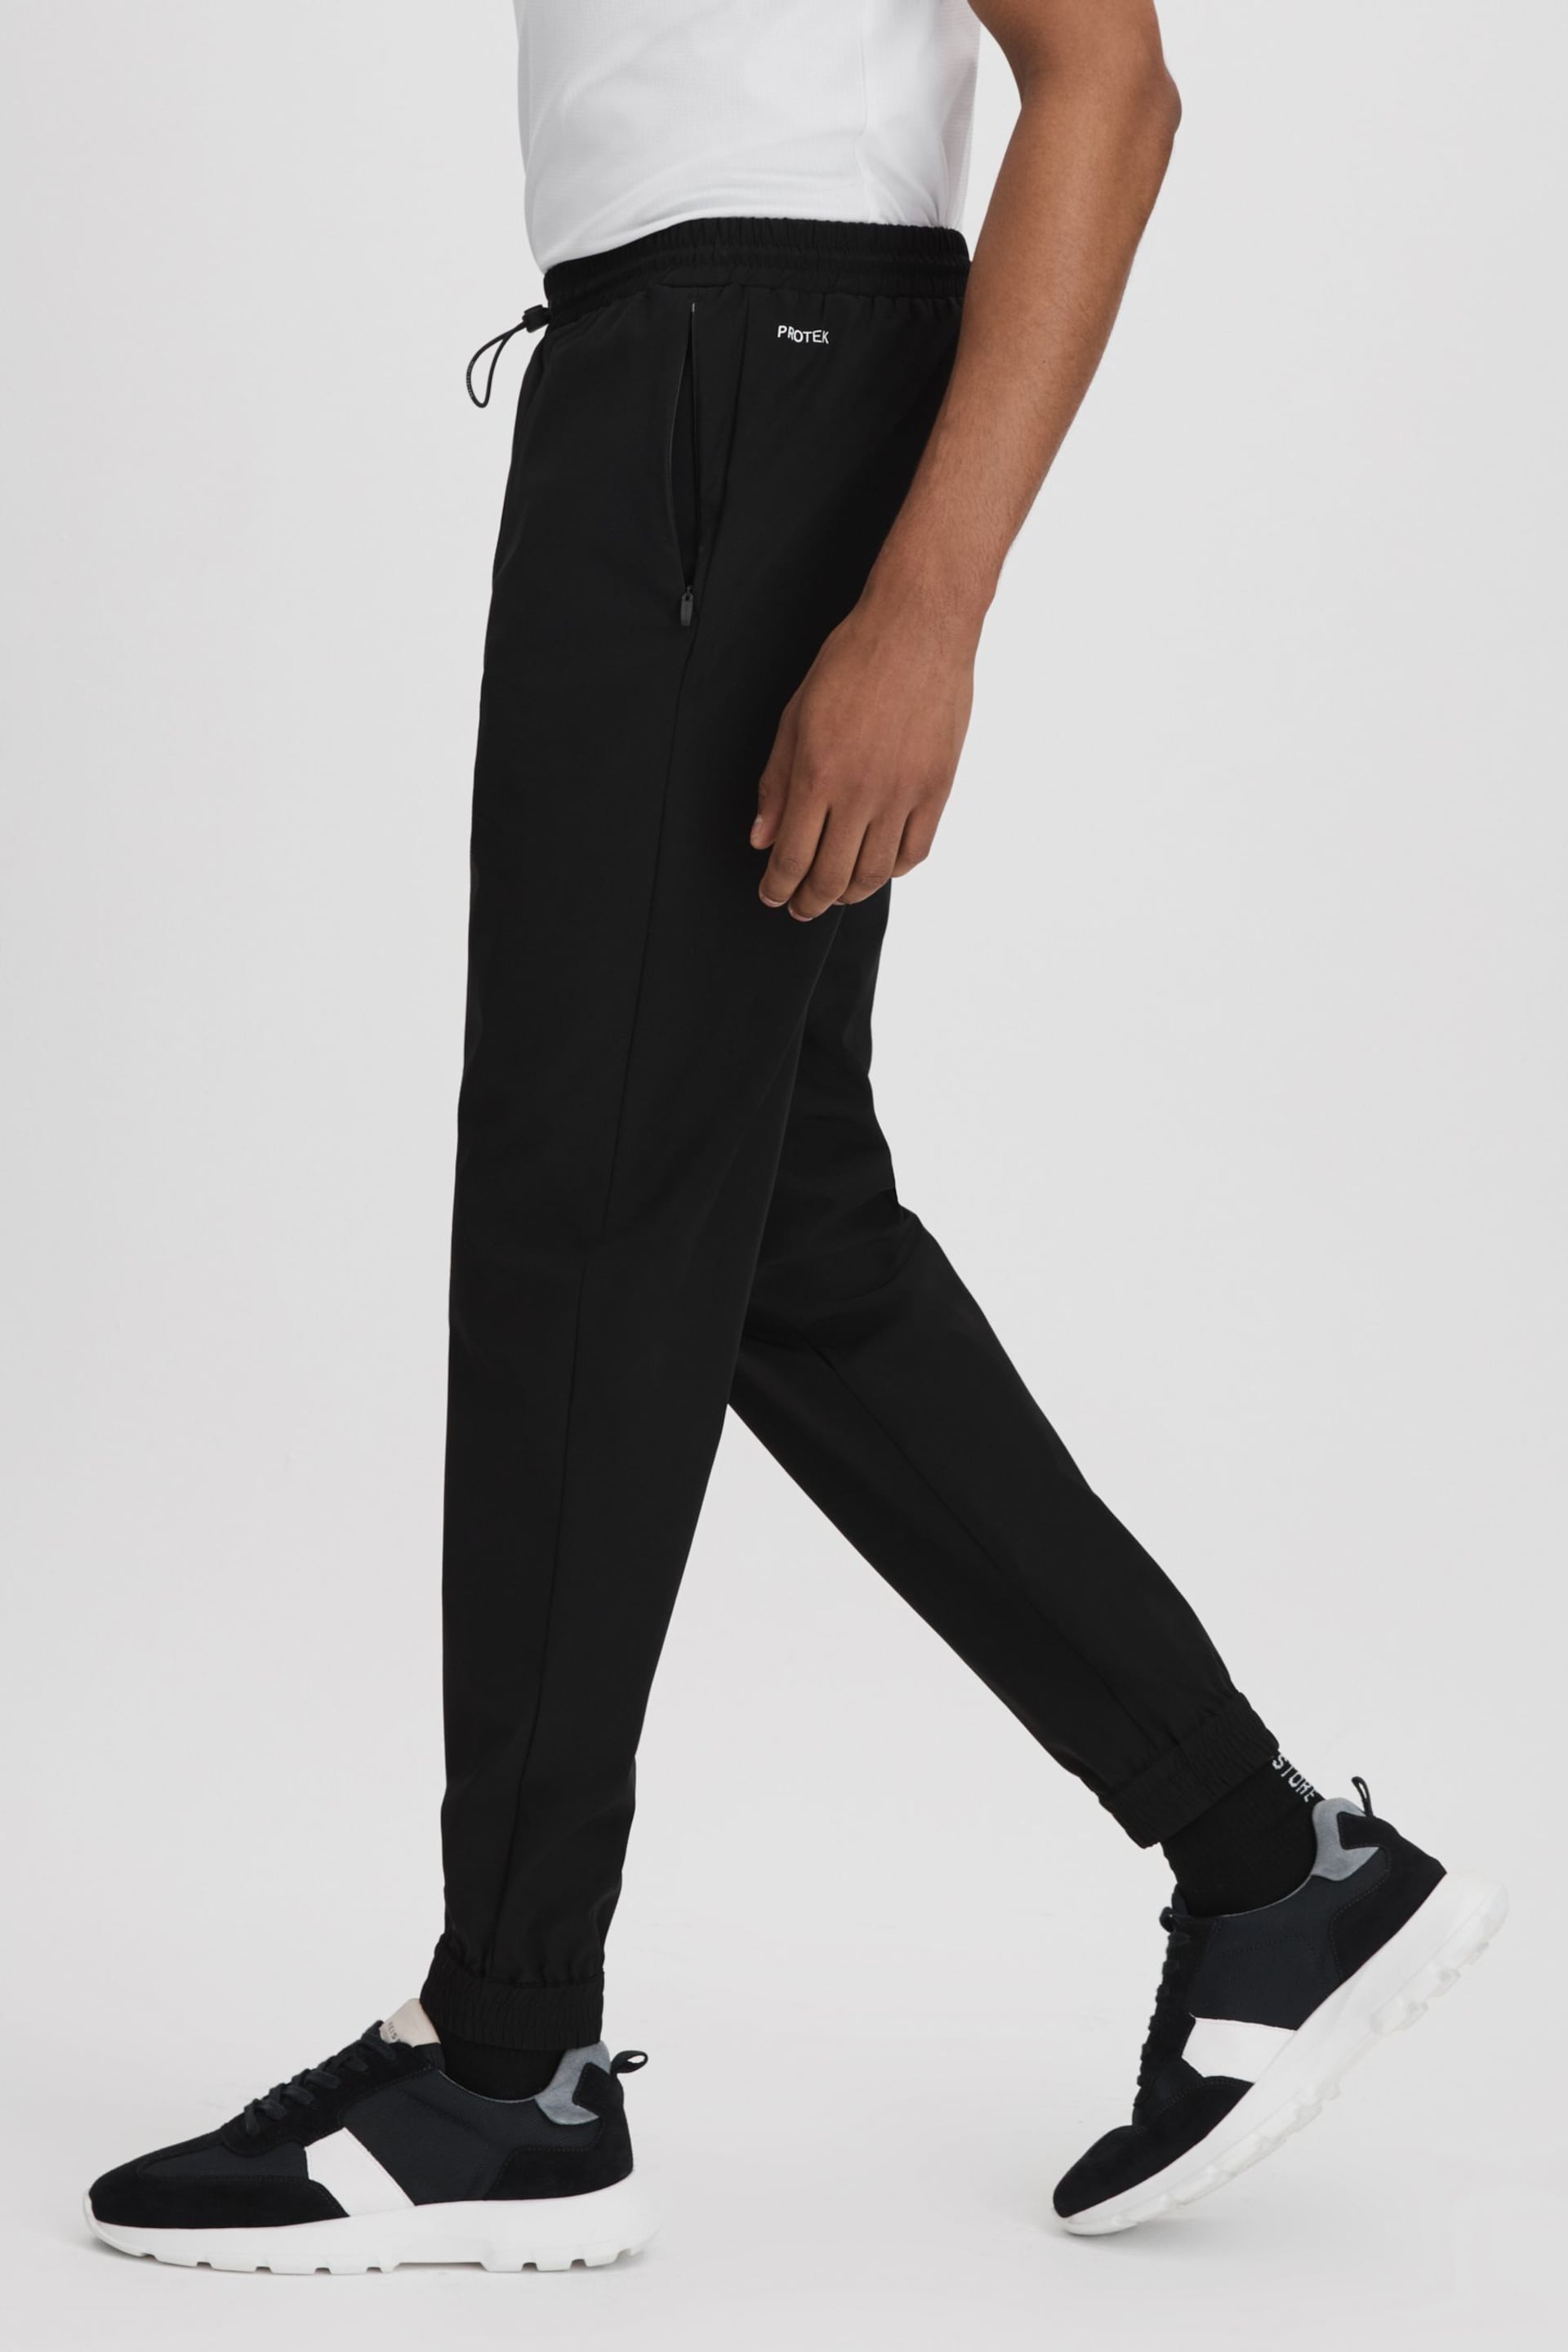 Reiss Onyx Black Dax Castore Water Repellent Track Pants - Image 7 of 8